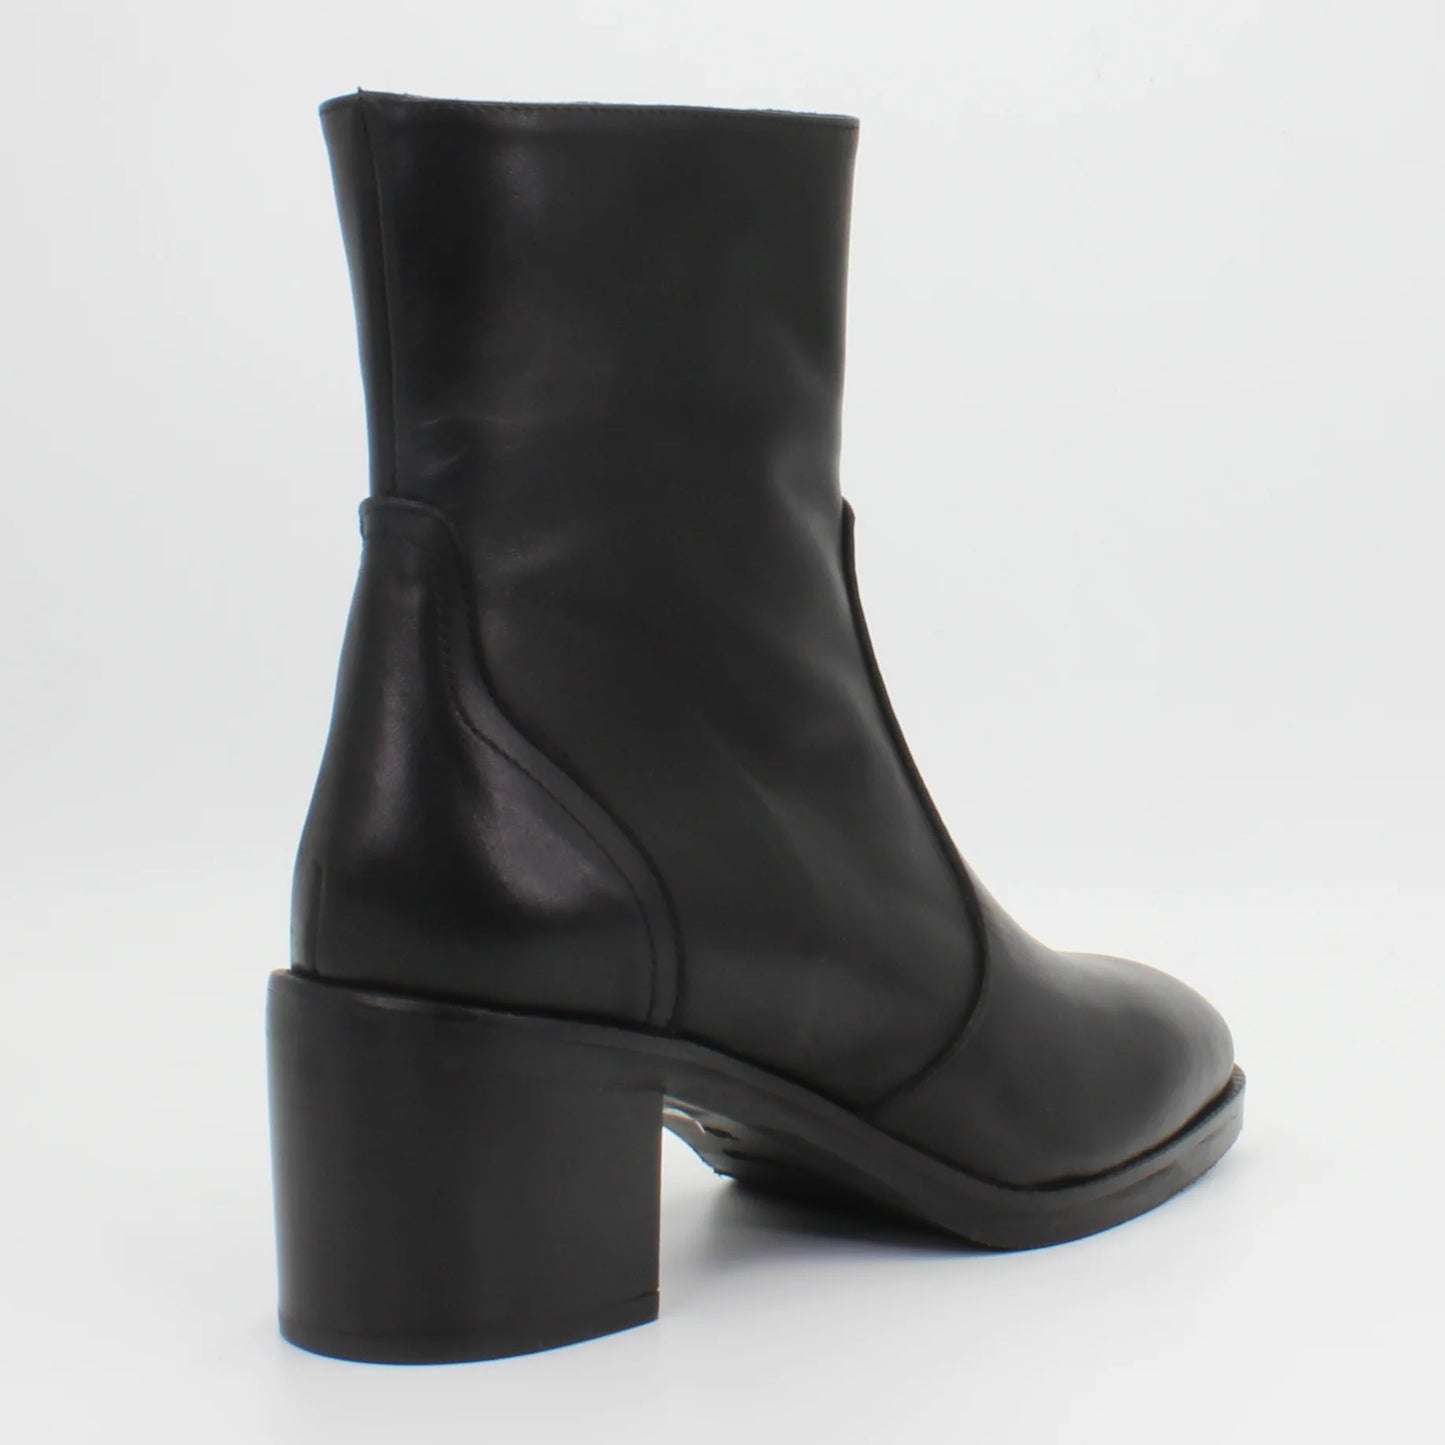 Shop Handmade Italian Leather Boot in Nero (GC3411) or browse our range of hand-made Italian boots for women in leather or suede in-store at Aliverti Cape Town, or shop online. We deliver in South Africa & offer multiple payment plans as well as accept multiple safe & secure payment methods.